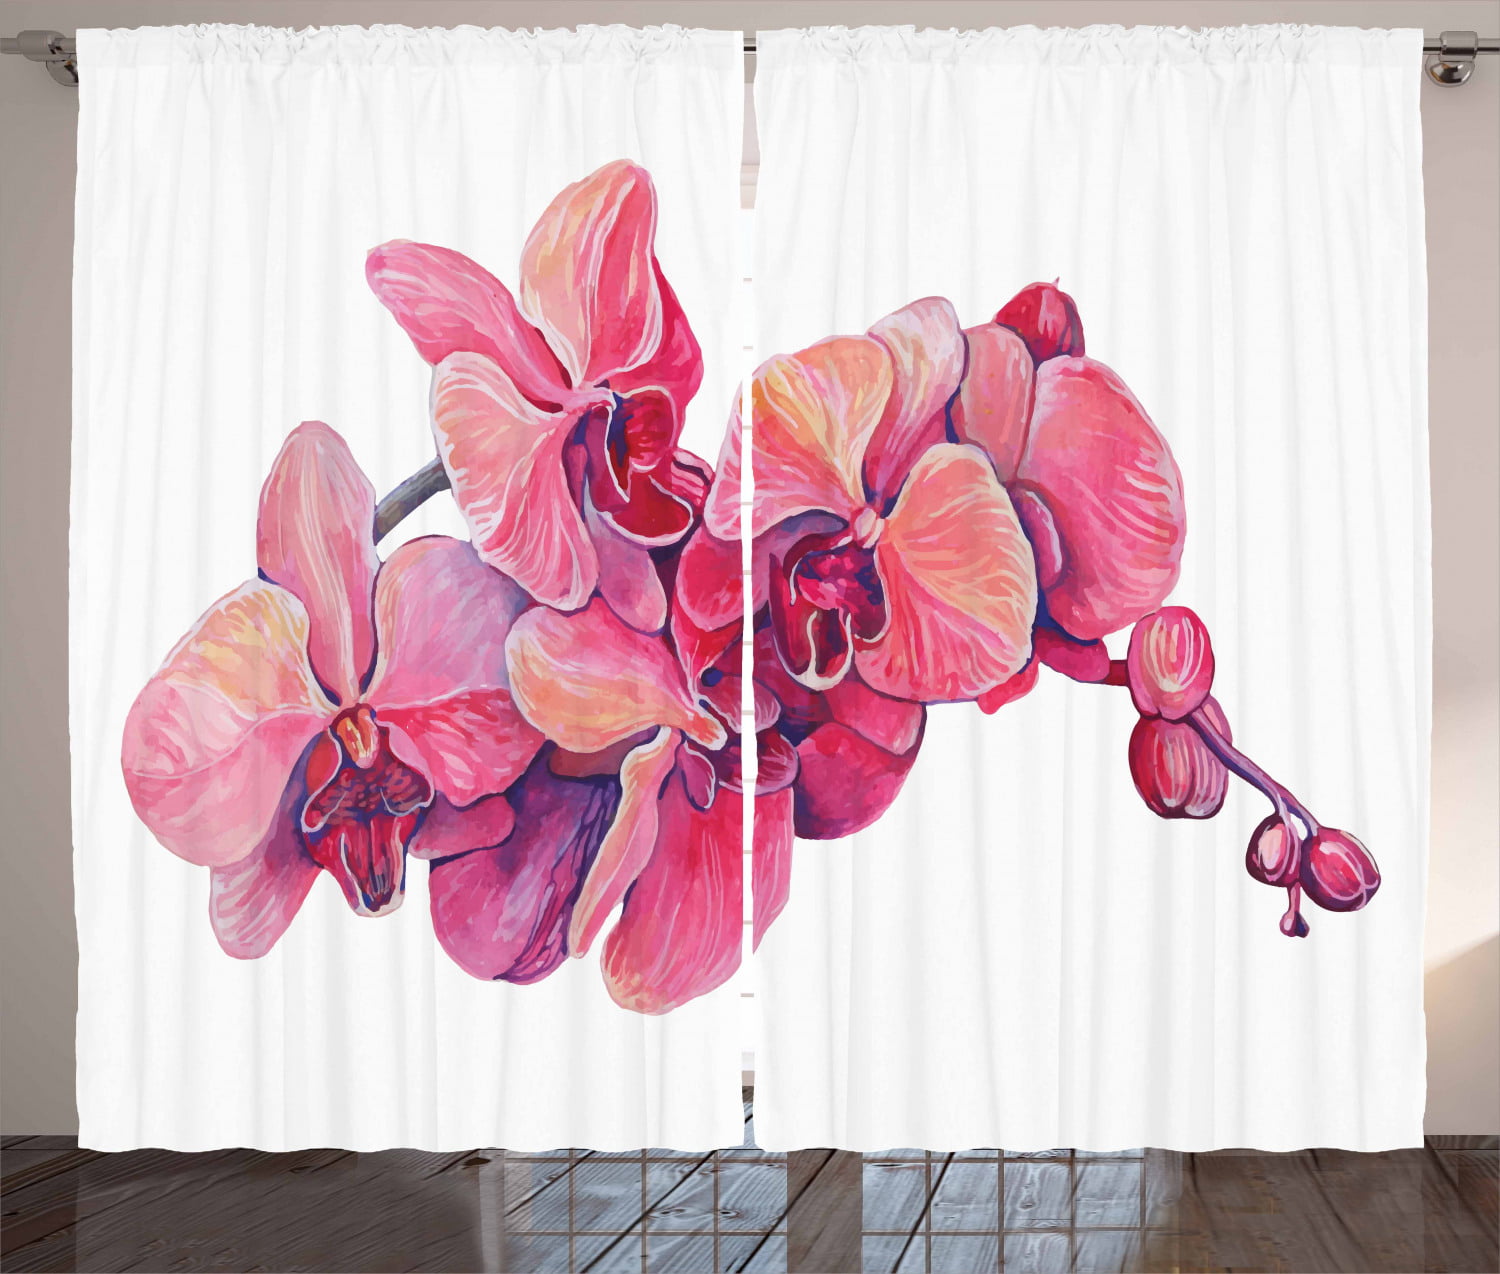 Scenery Curtain Wellmira Printed with Flowers in Pots Image for Living Room 